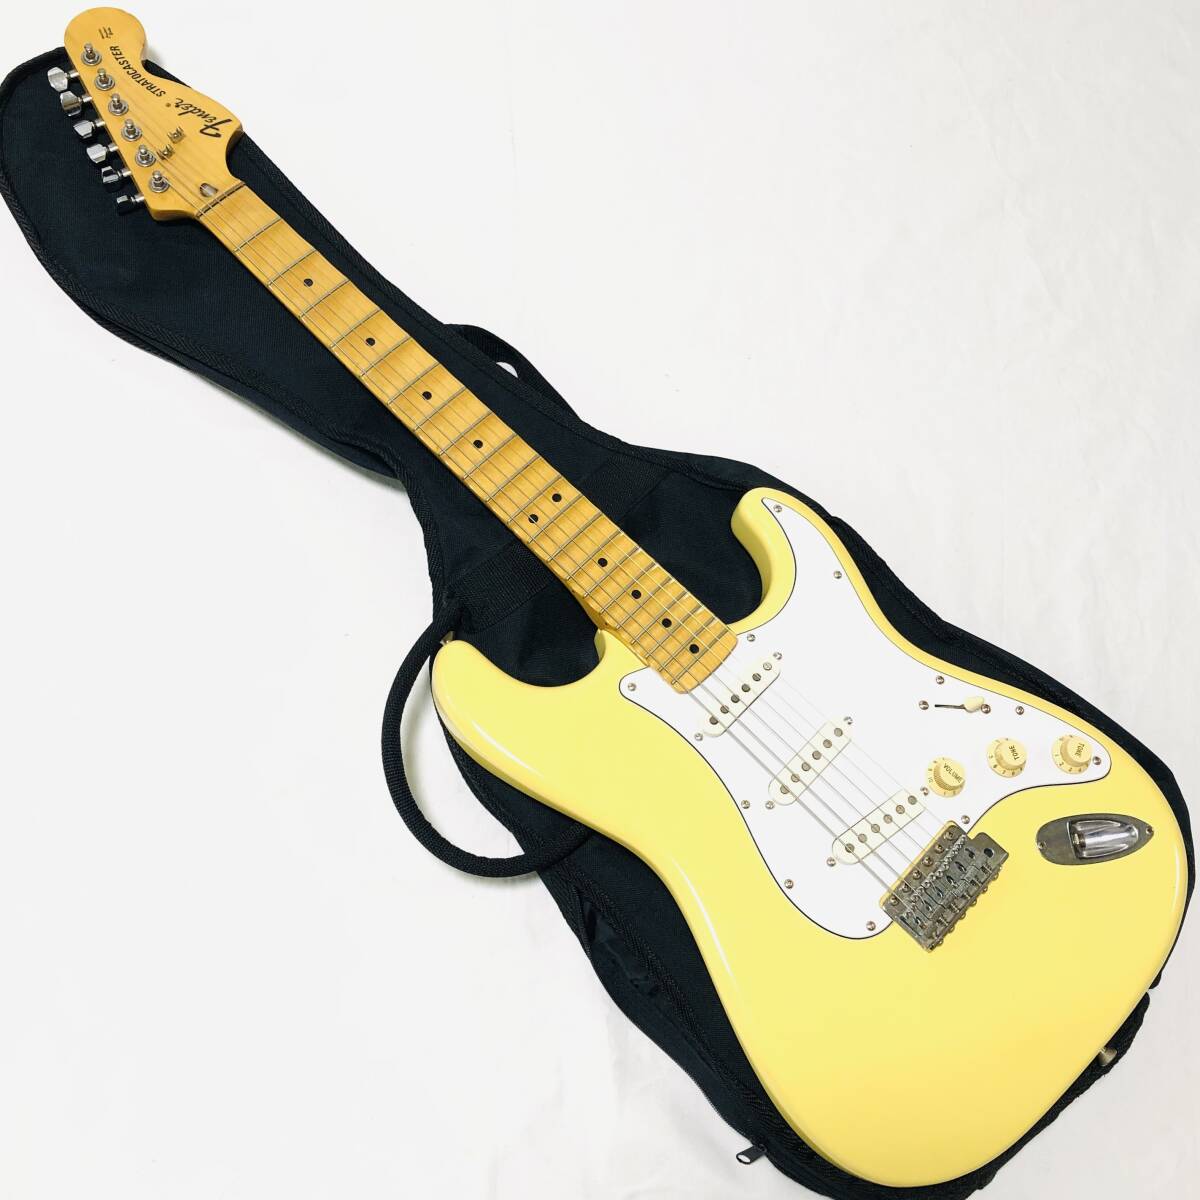 Fender Stratocaster ST72-SC Crafted in Japan フェンダー ストラトキャスター スキャロップモデル Yngwie Malmsteenの画像1